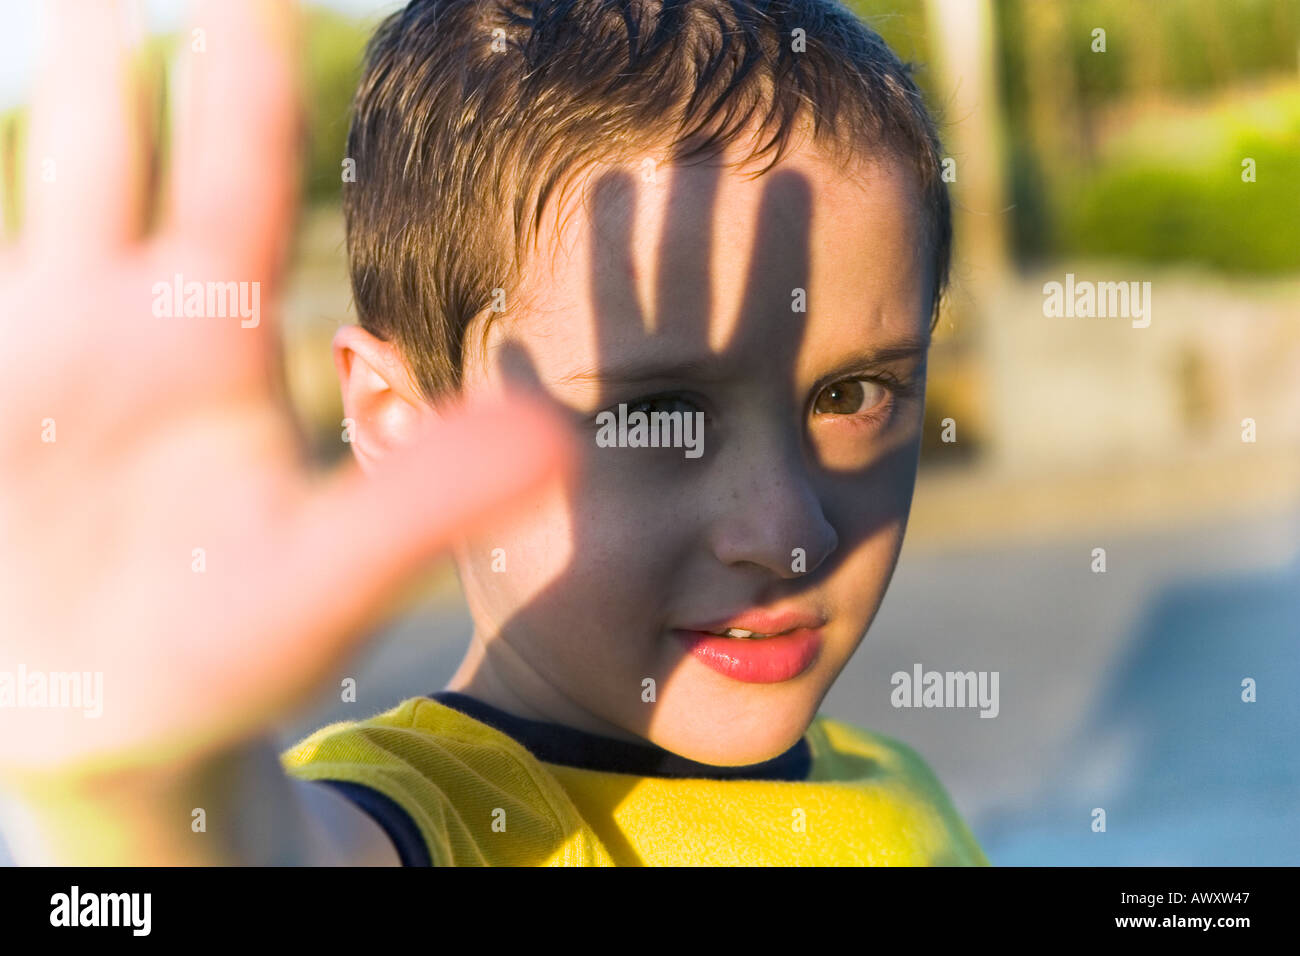 Young boy blocking sunlight with his hand causing a handprint shadow upon his face Stock Photo